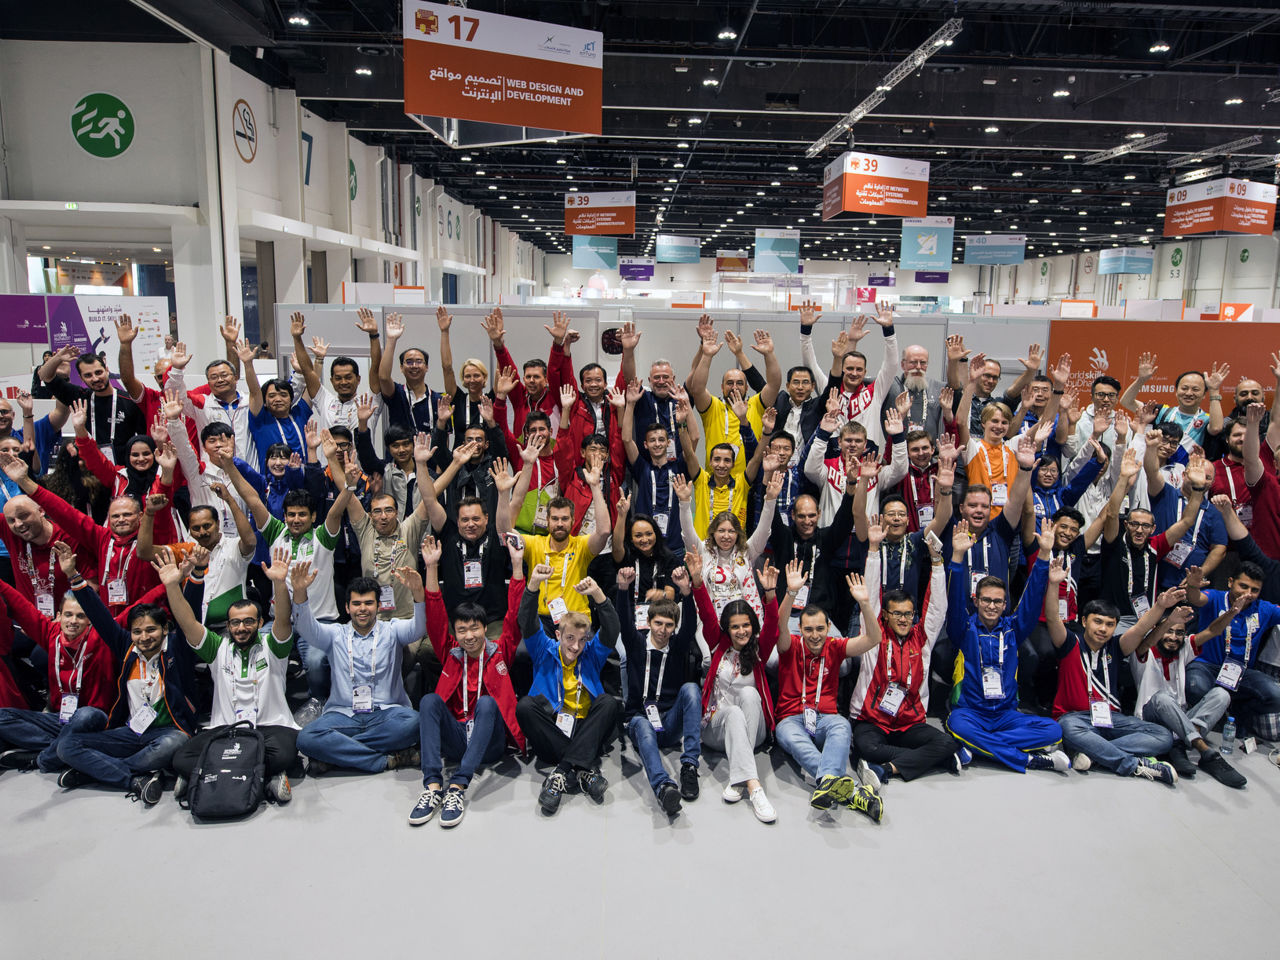 Talented youth from around the world make a final push for medal glory at WorldSkills Abu Dhabi 2017